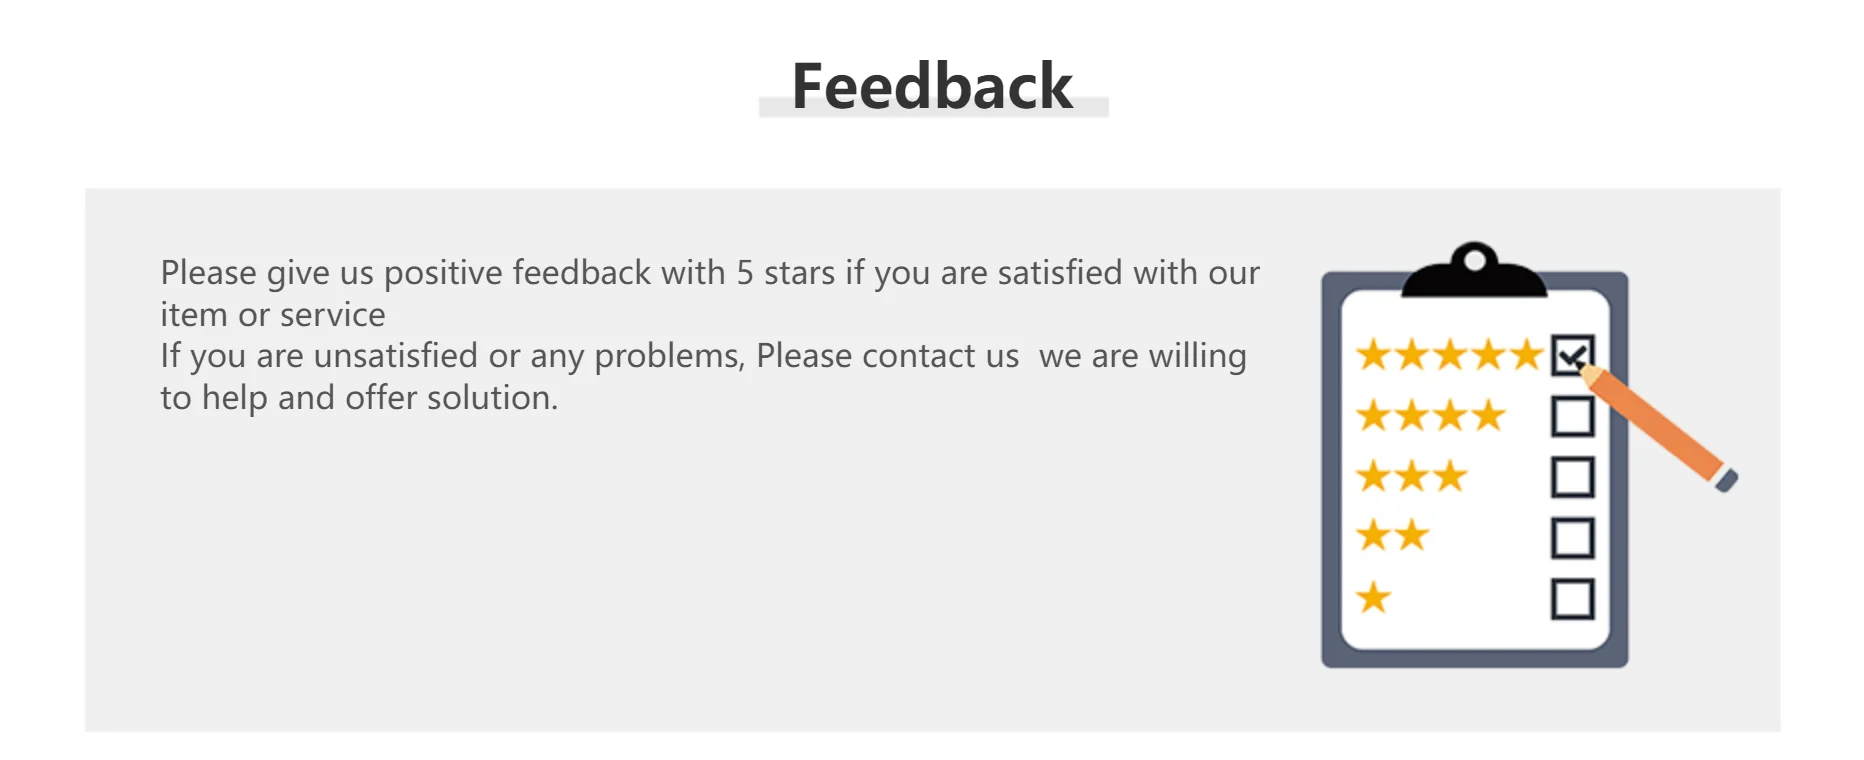 Feedback Please give us positive feedback with 5 stars if you are satisfied with our item or service